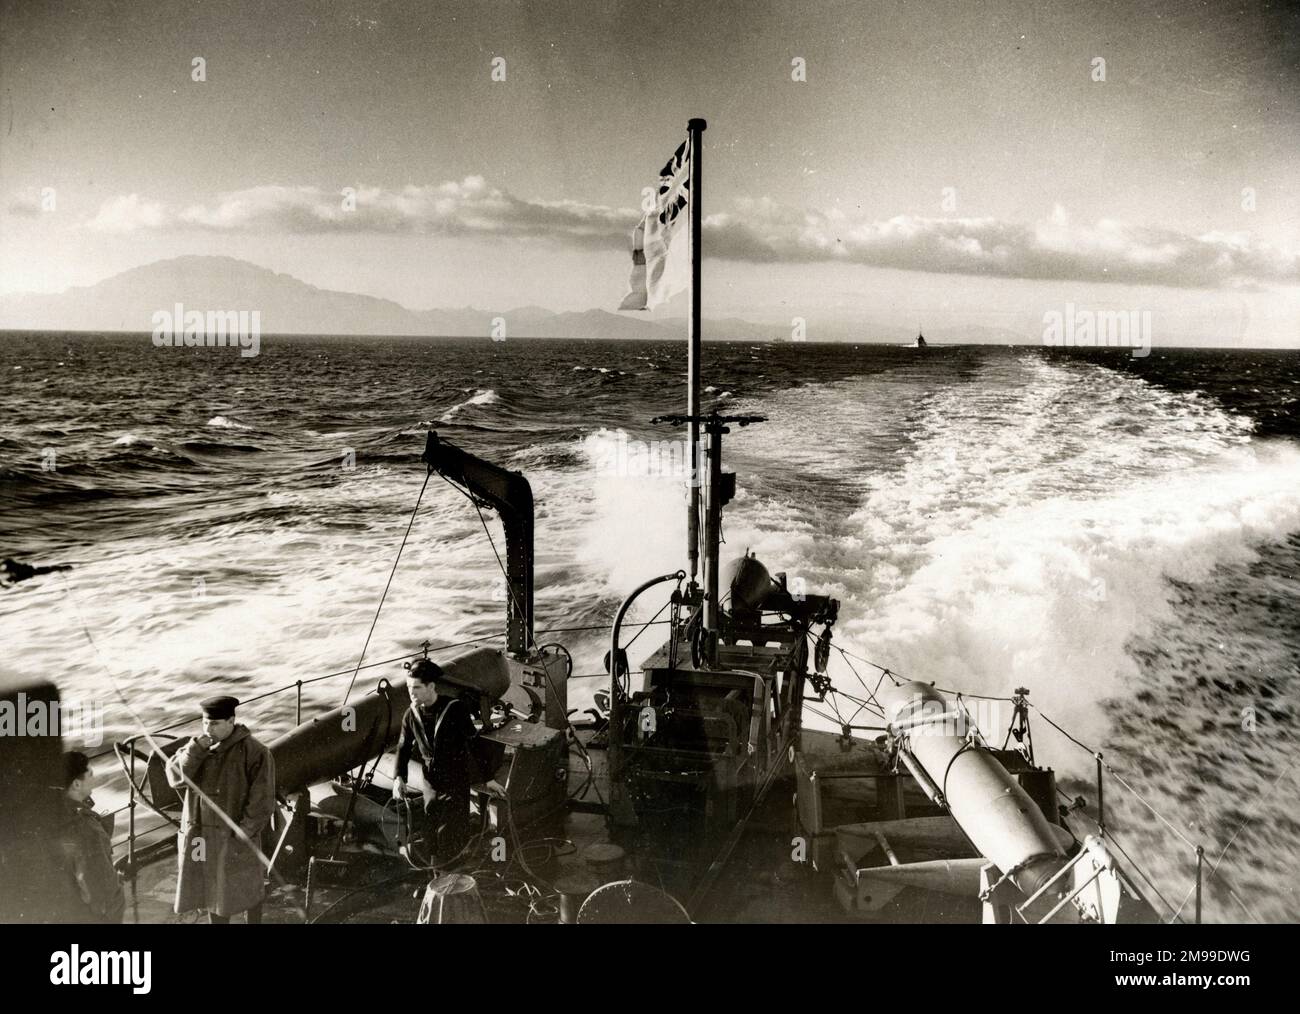 British Navy under the White Ensign policing the Mediterranean, January 1941, Second World War. Stock Photo